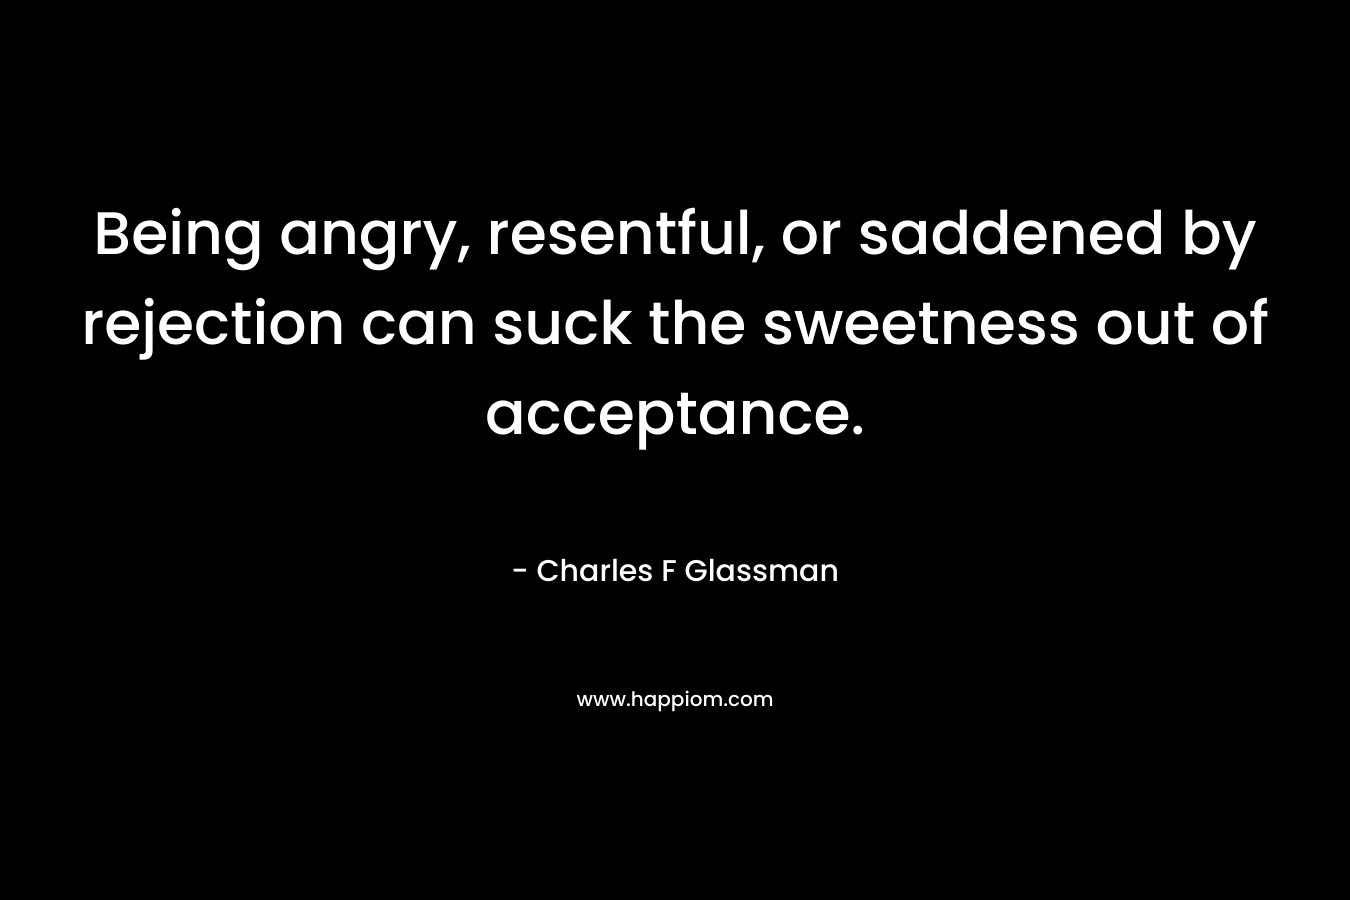 Being angry, resentful, or saddened by rejection can suck the sweetness out of acceptance. – Charles F Glassman